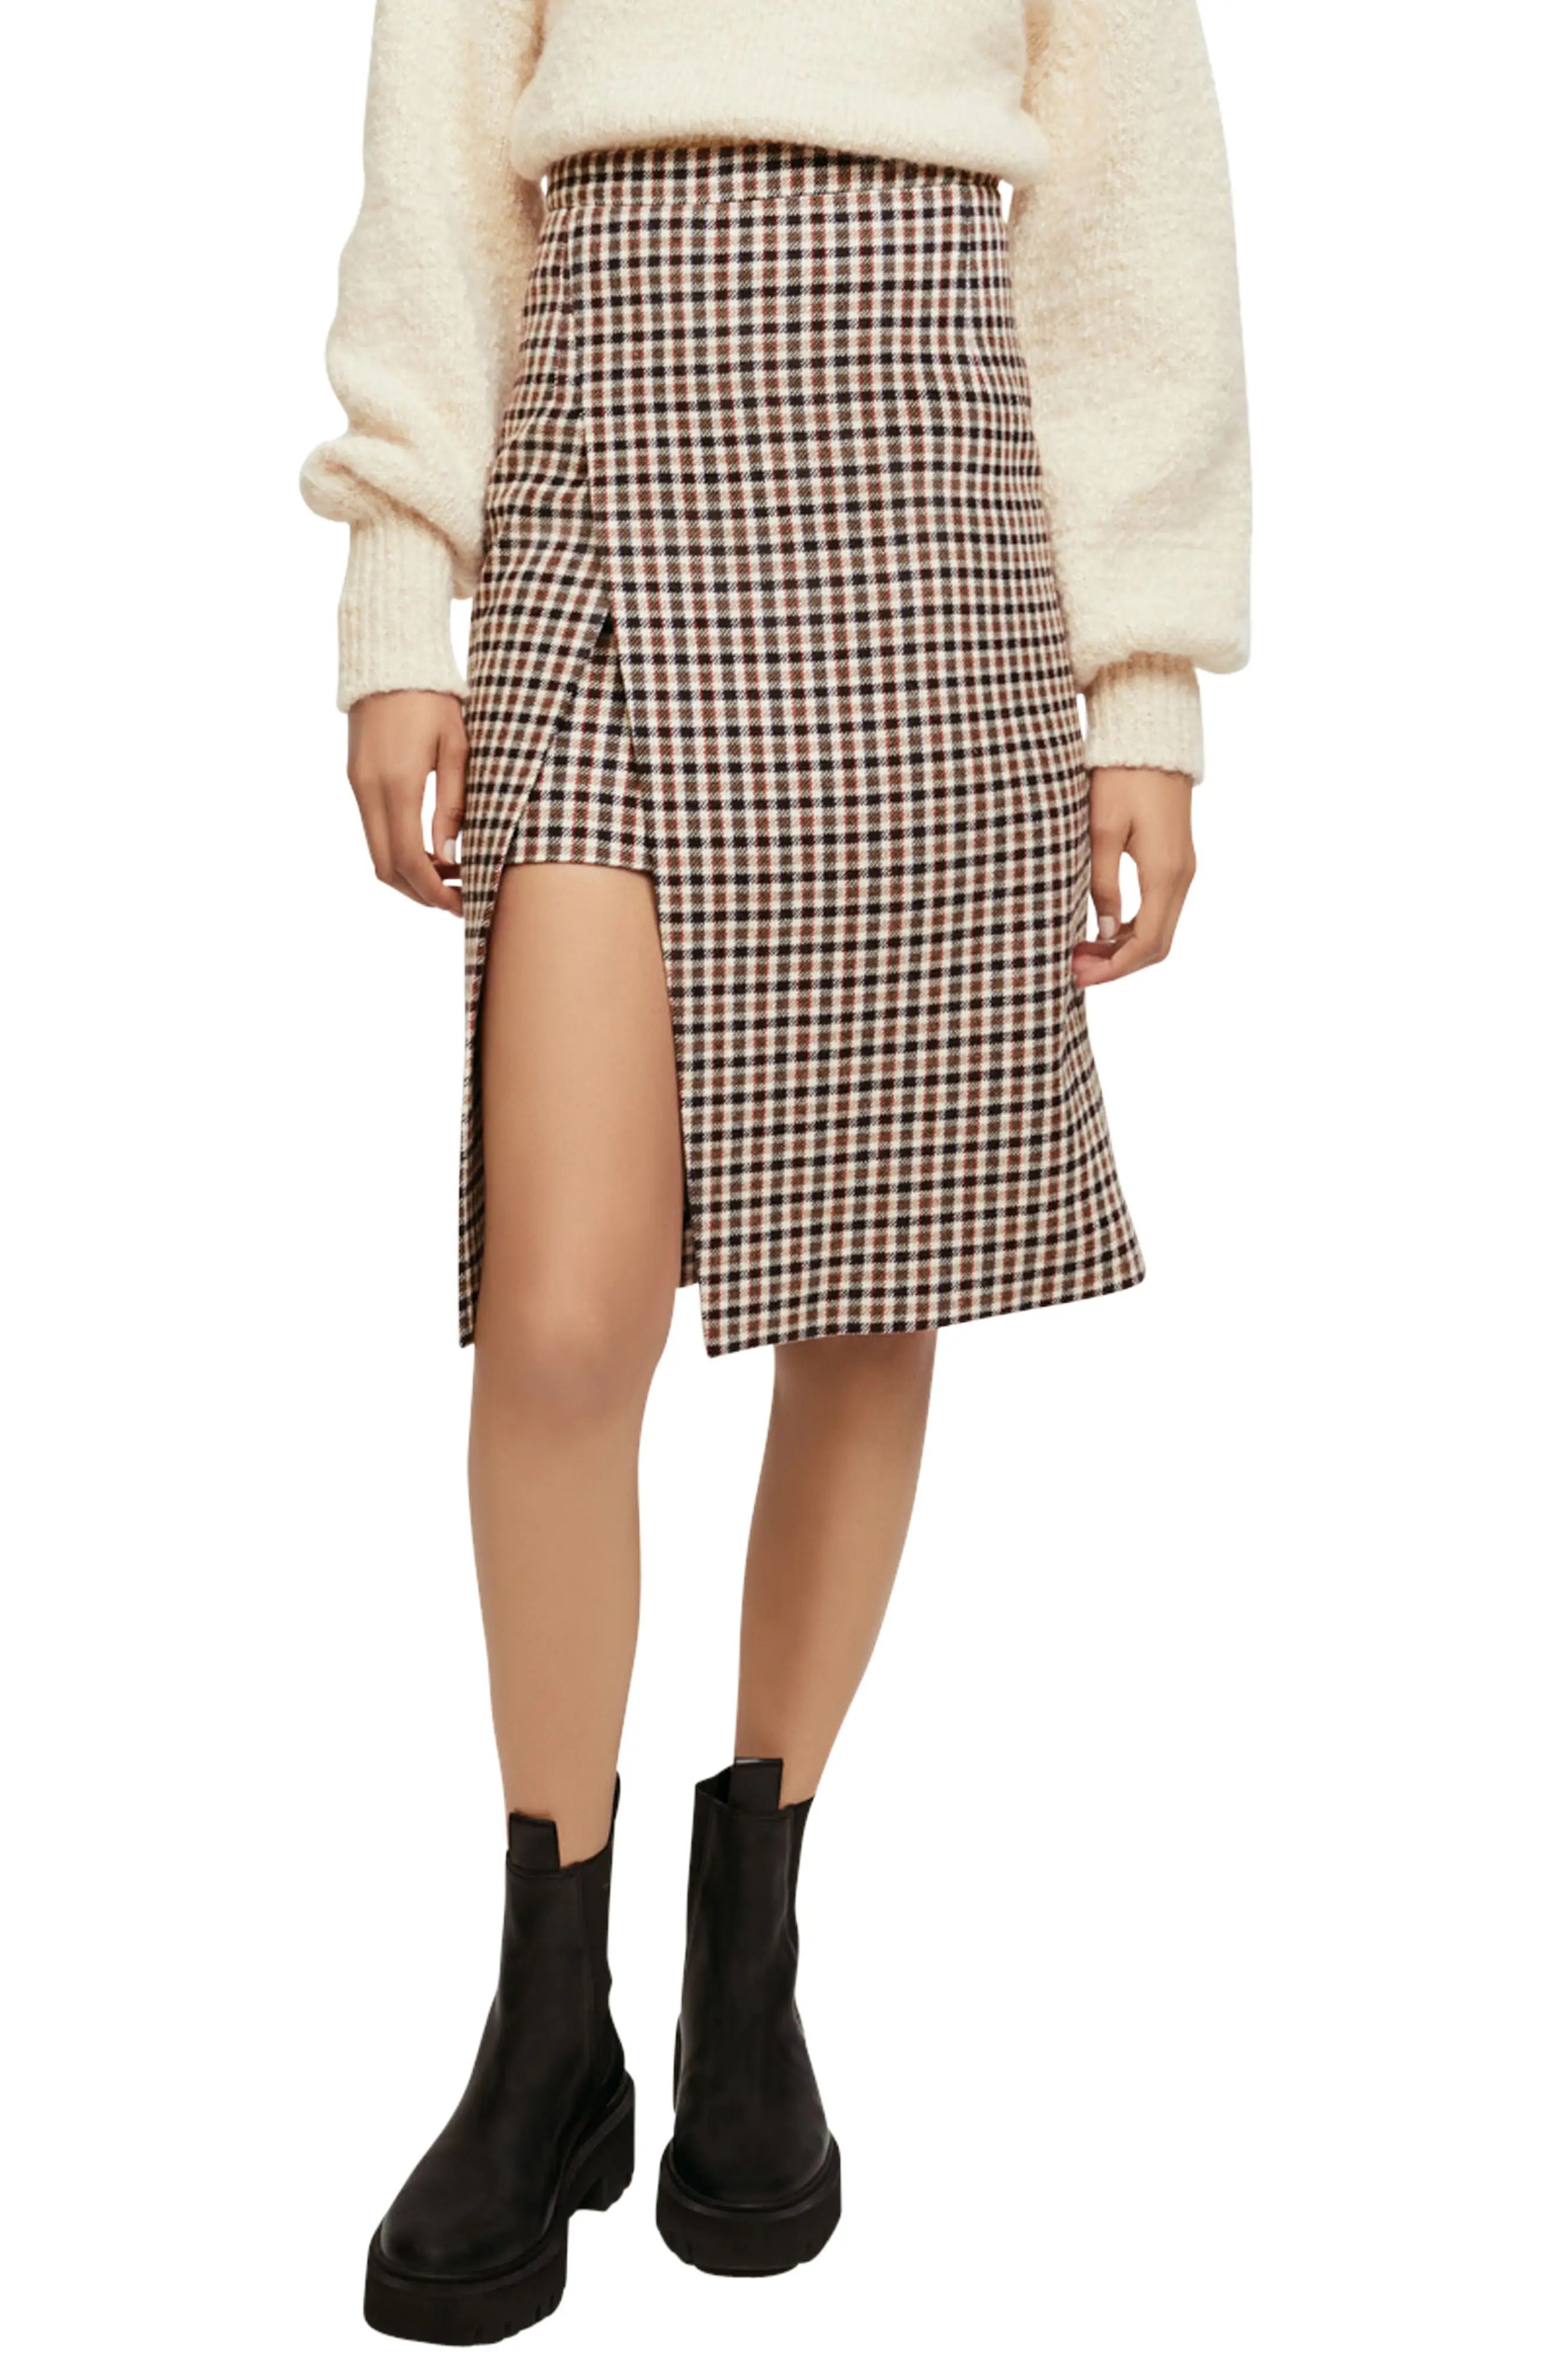 maje Josselin Layered Plaid Cotton & Wool Blend Skirt, Size 2 Us in Camel at Nordstrom | Nordstrom